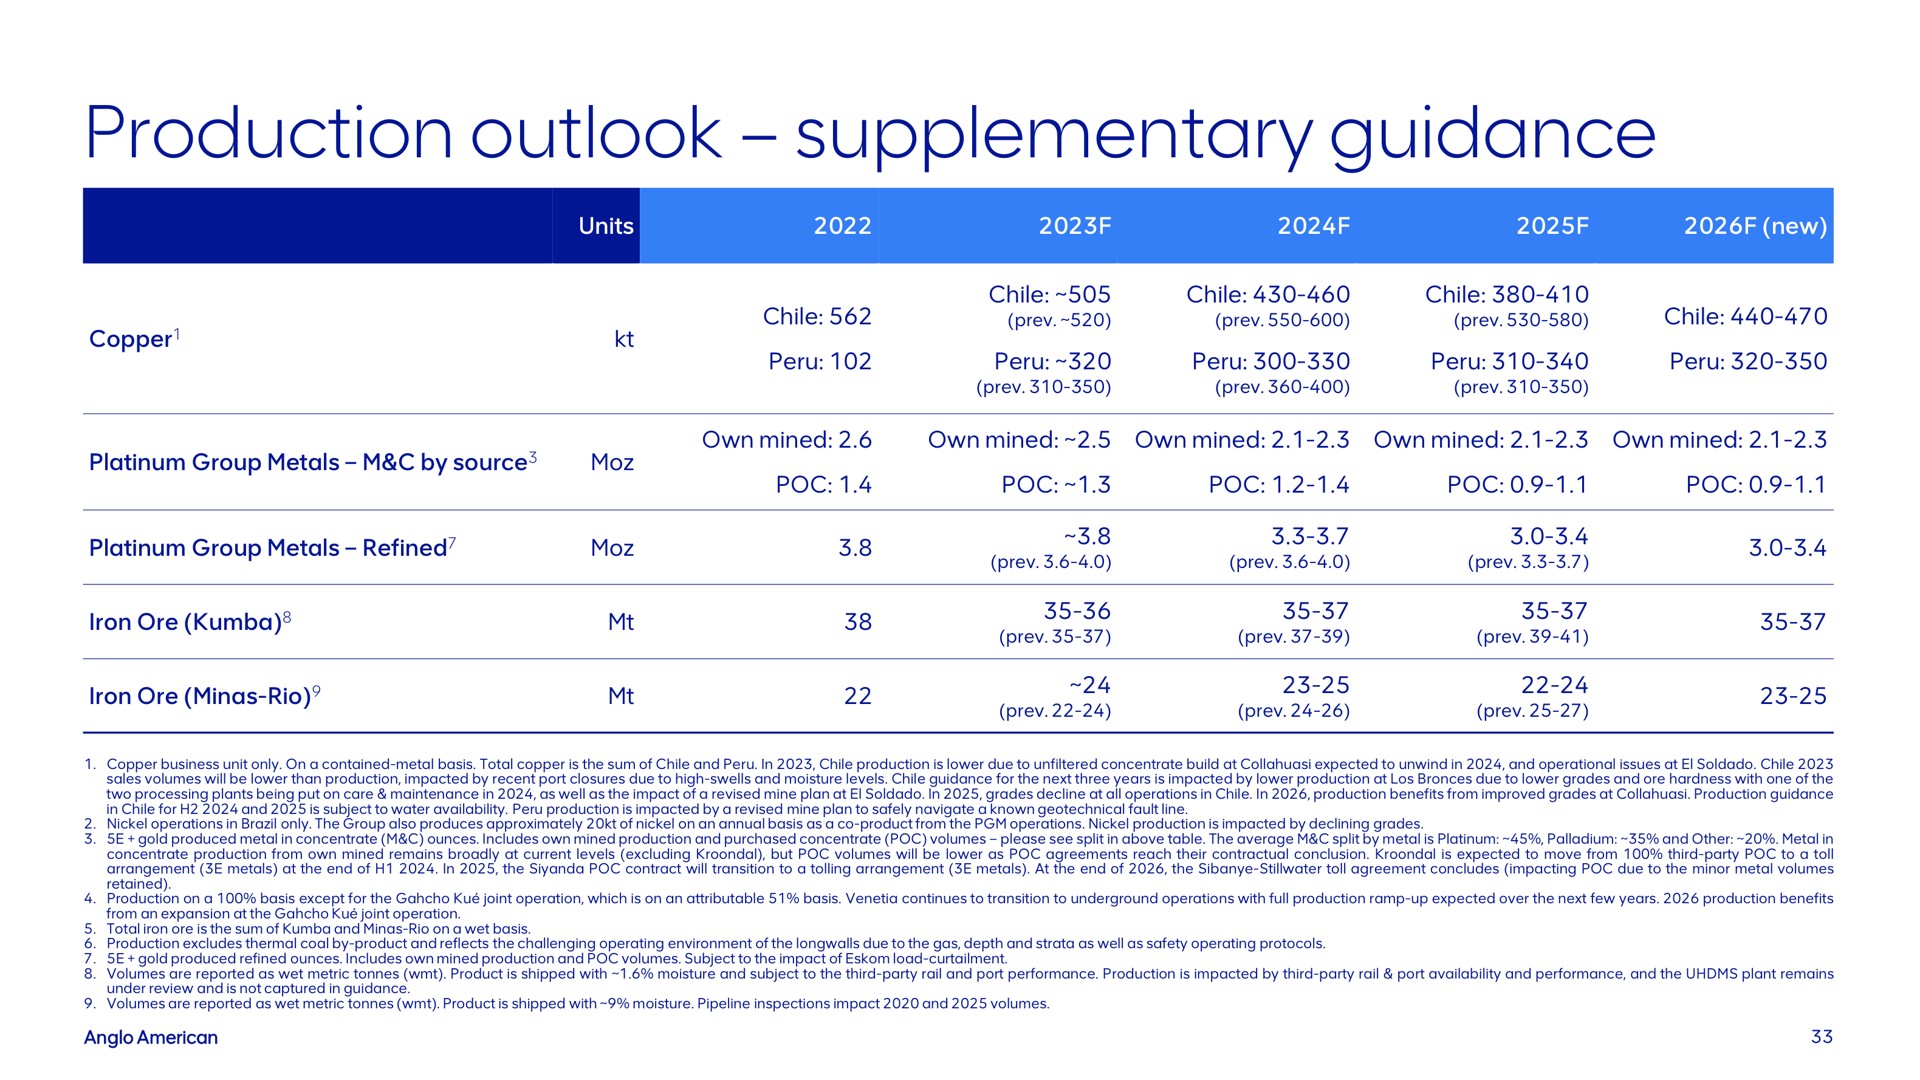 production outlook supplementary guidance | AngloAmerican